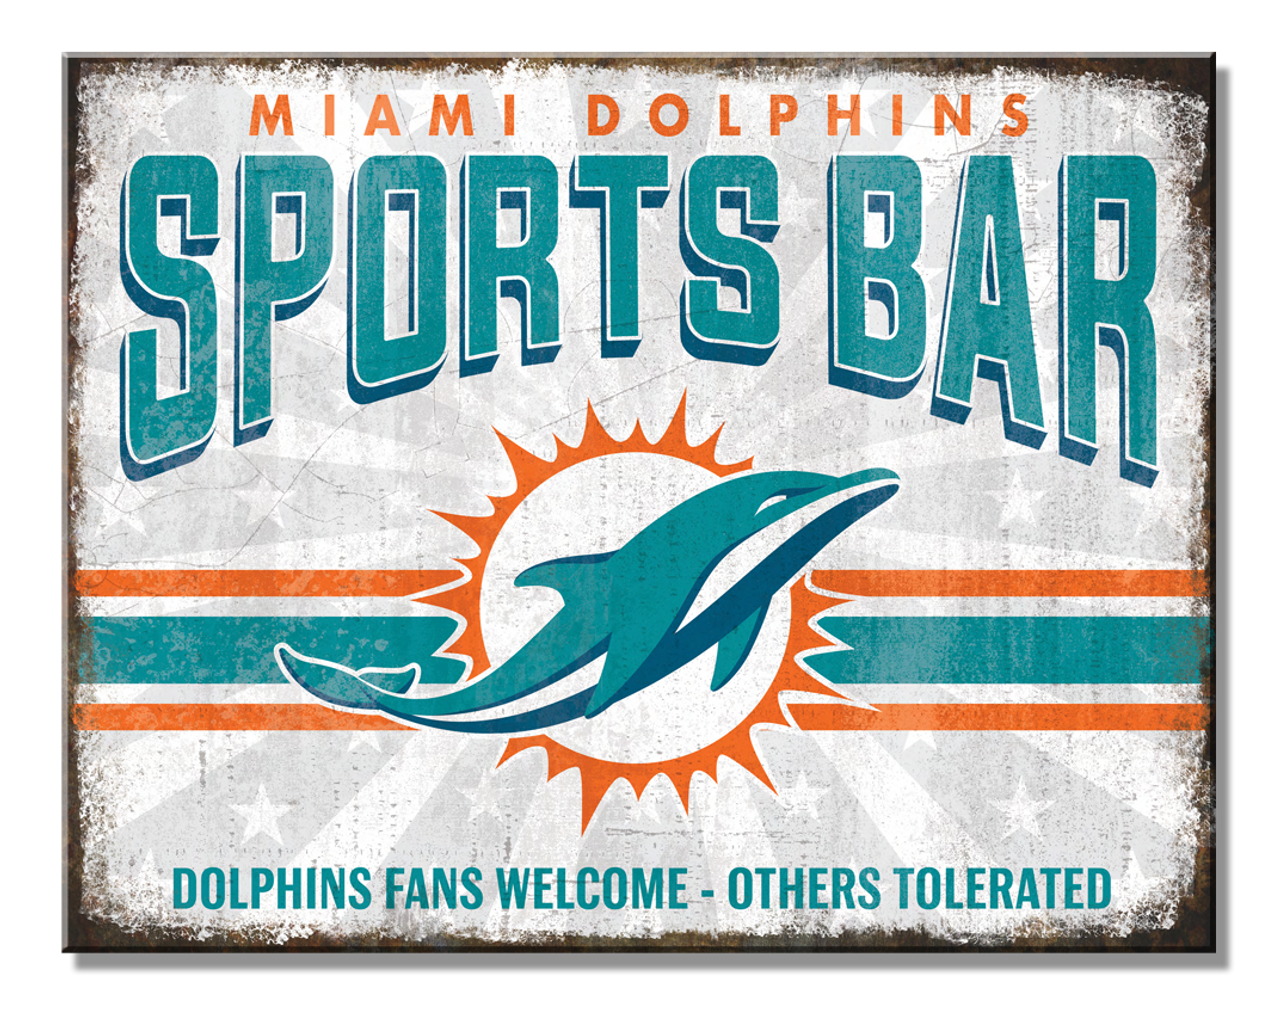 Custom Miami Dolphins Football Schedule Magnets, Free Samples